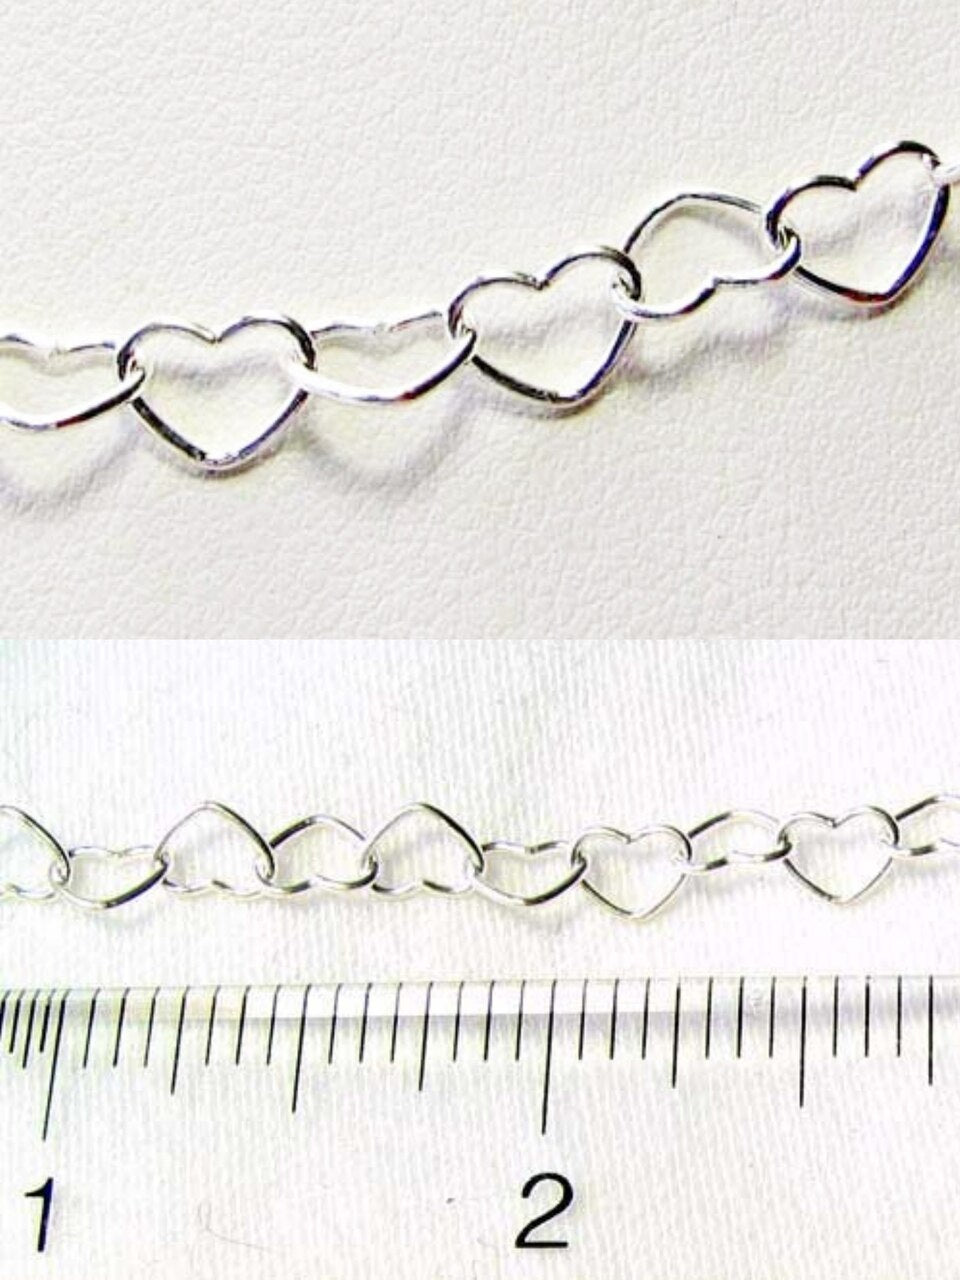 Solid Sterling Silver 5mm Heart Chain 12 inches (3.79G) 9197 - PremiumBead Primary Image 1